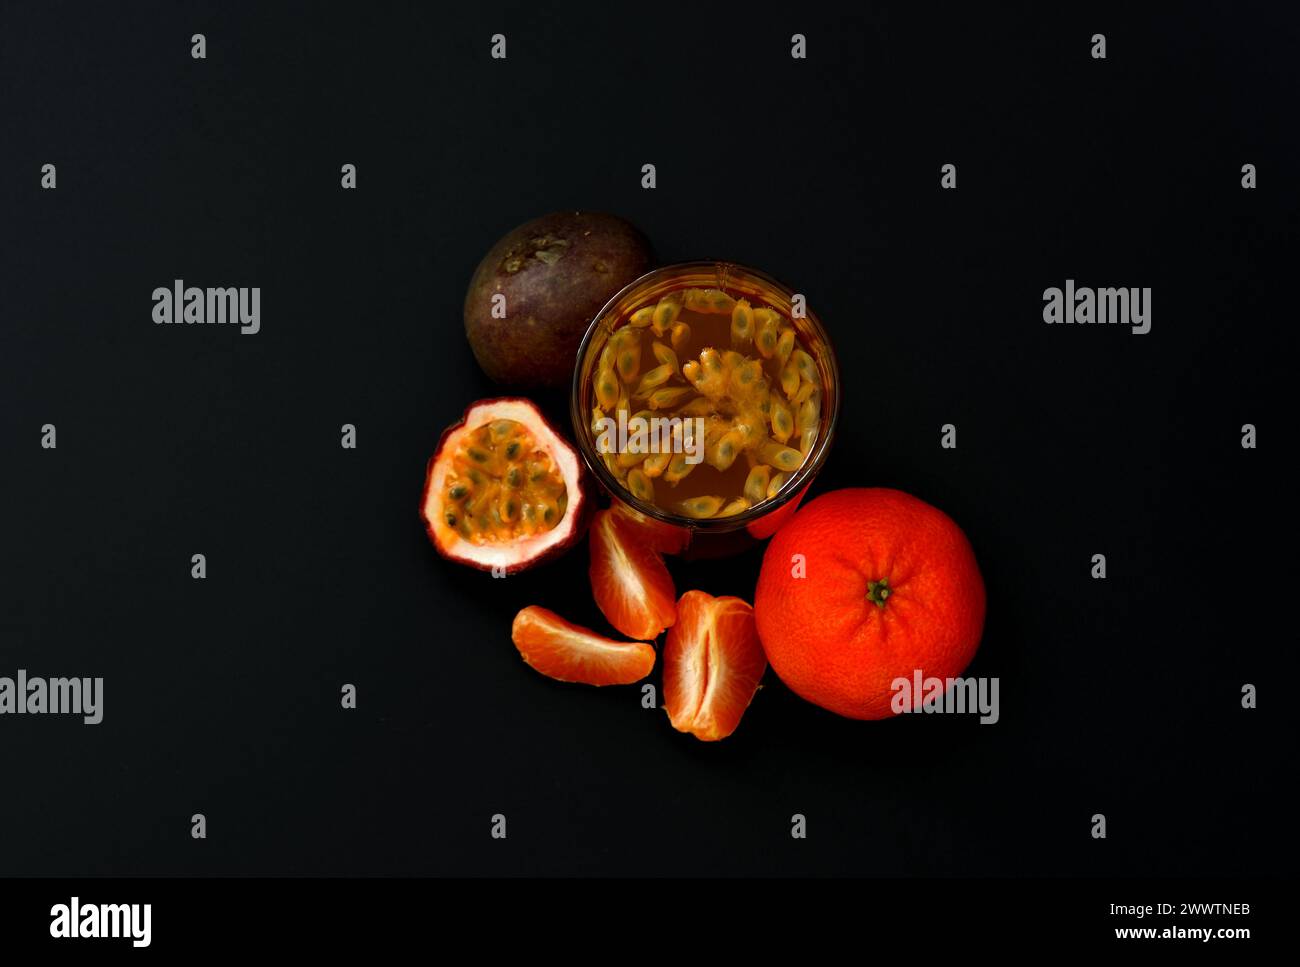 A glass of fruit juice with seeds on a black background, next to pieces of ripe mandarin passion fruit. Top view, flat lay. Stock Photo